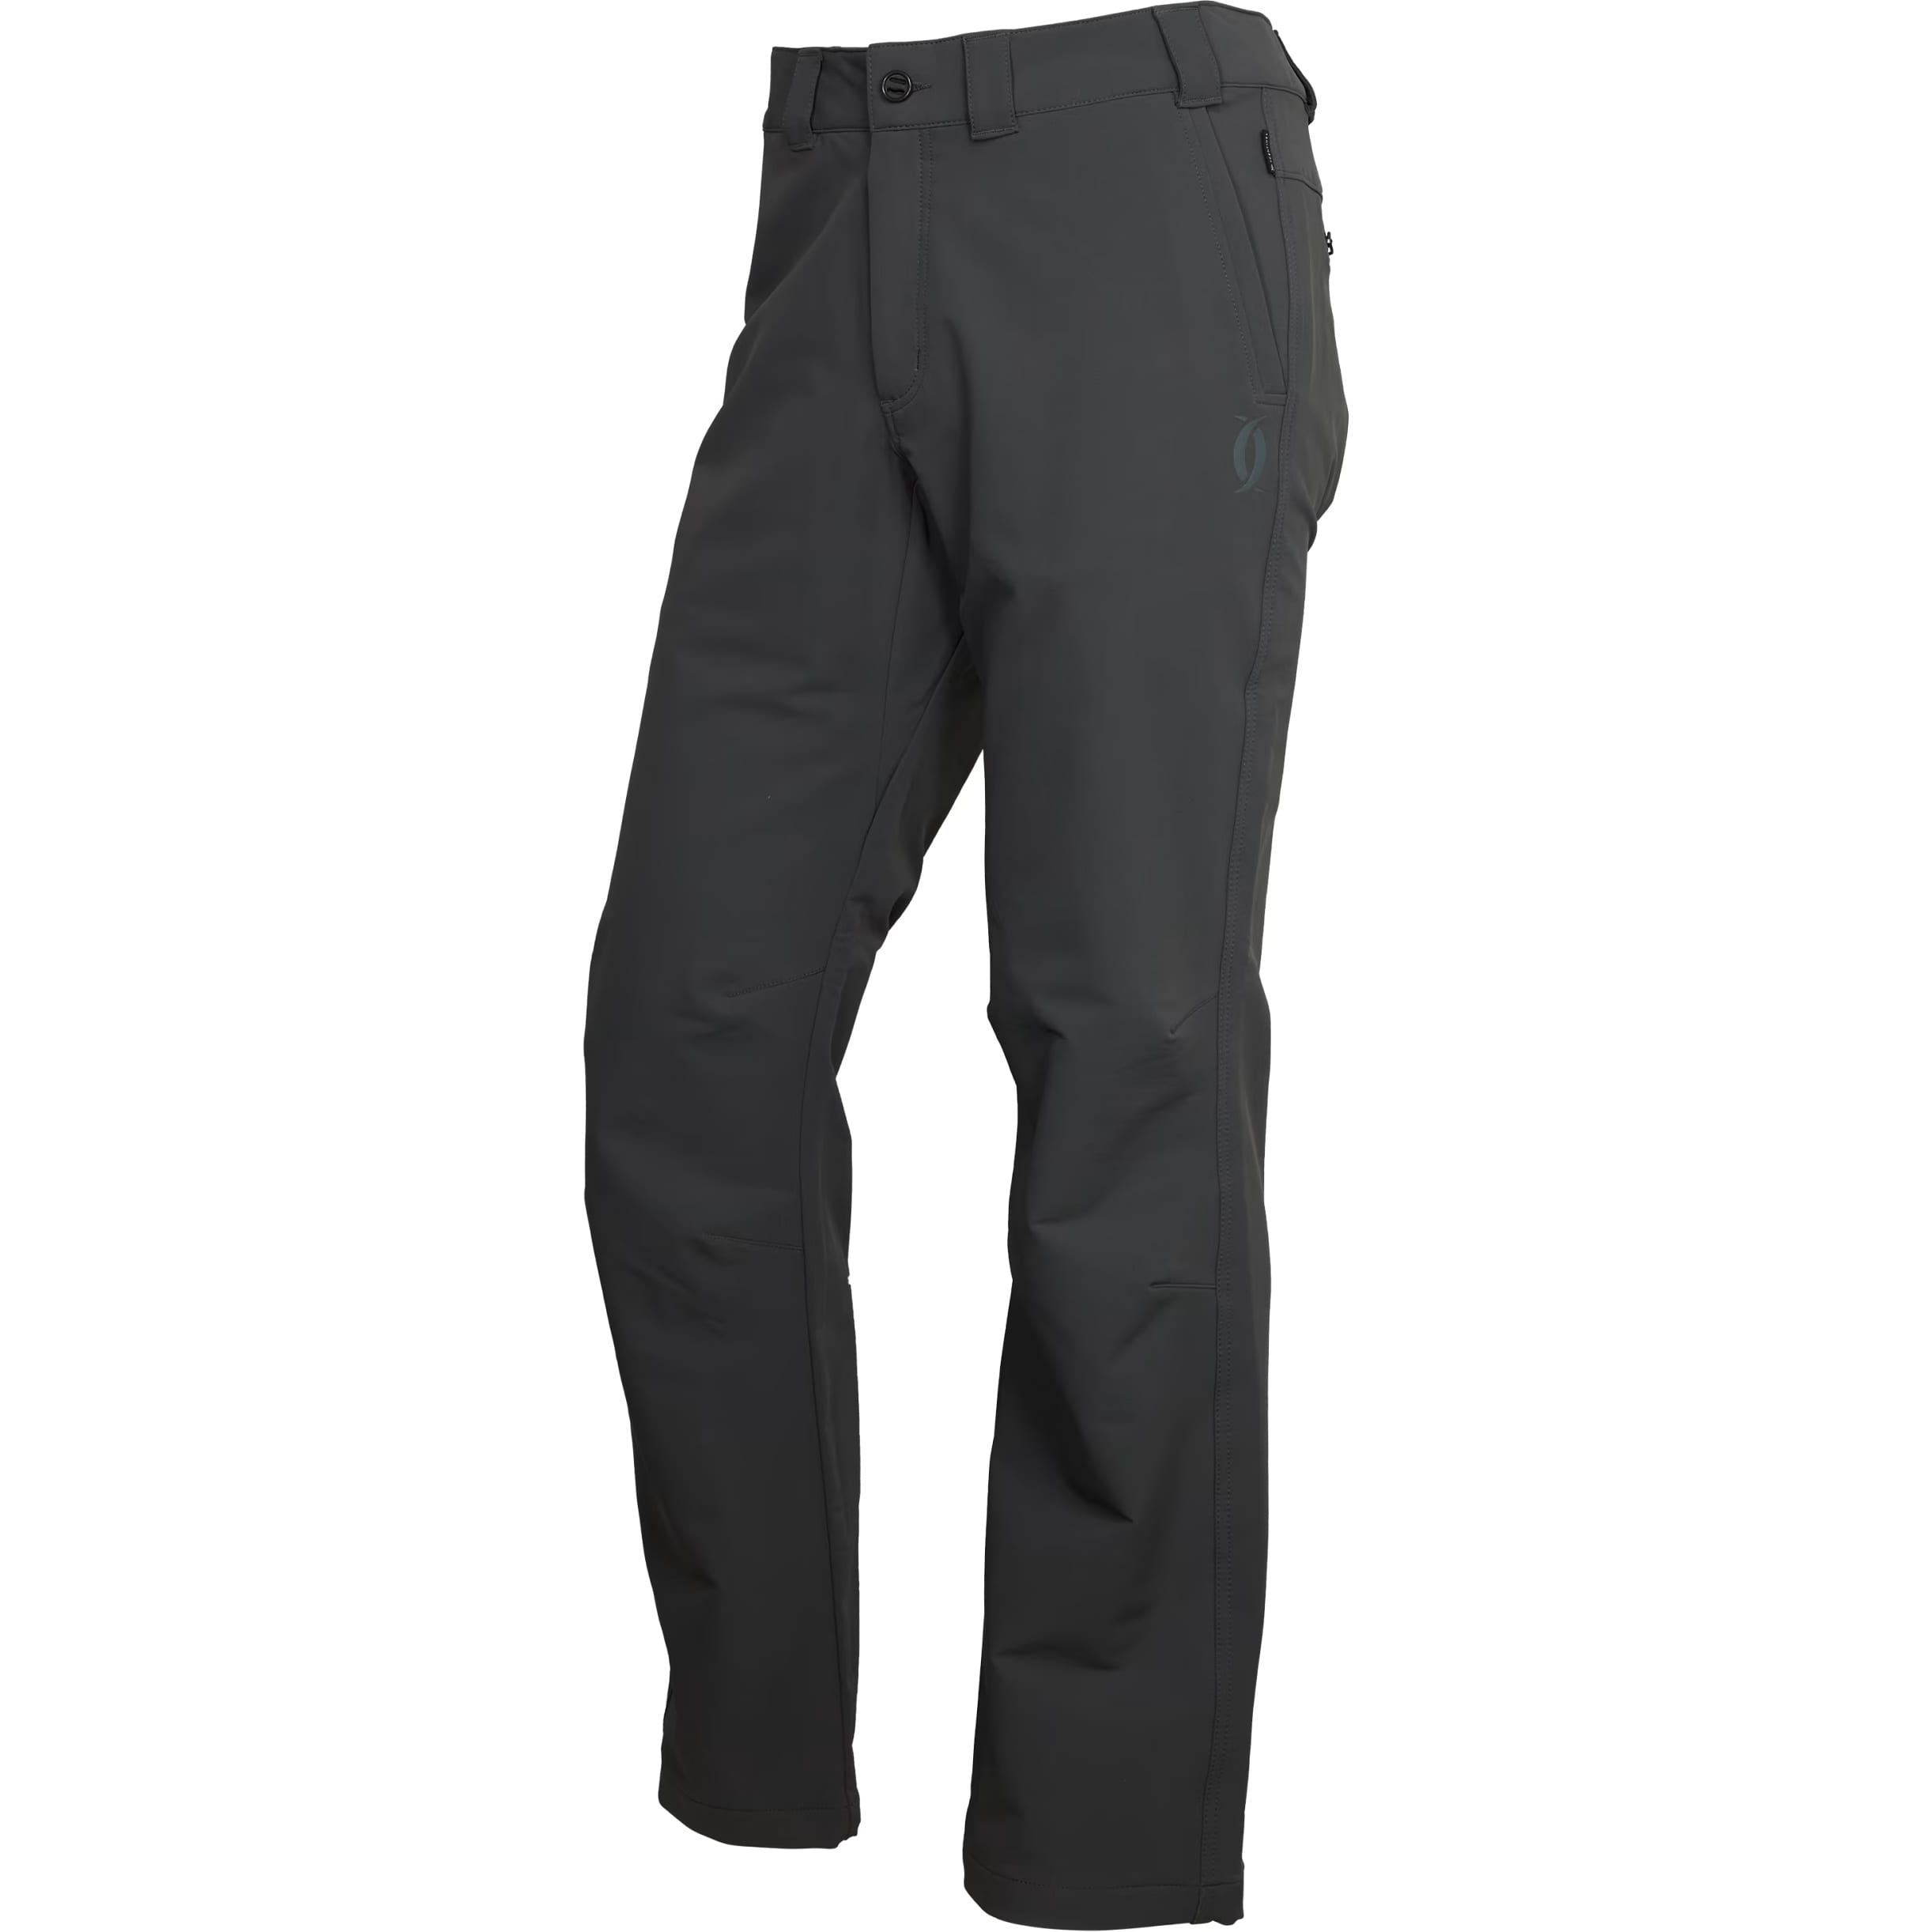 Cabela’s® Men’s Instinct Grindstone Pants with 4MOST REPEL and SCENTINEL